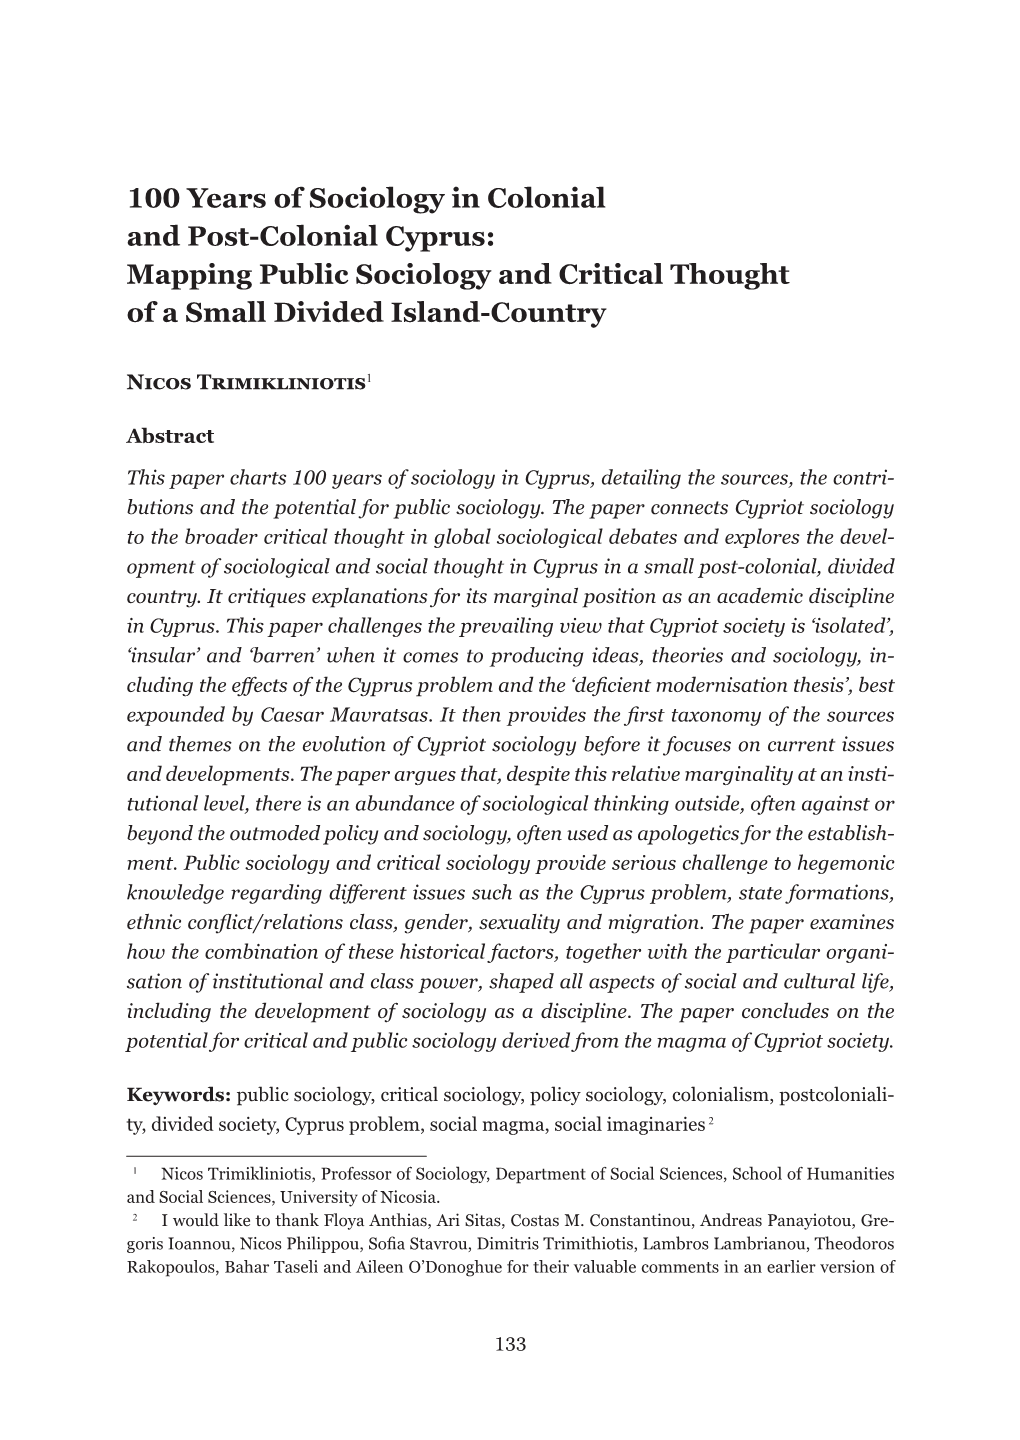 100 Years of Sociology in Colonial and Post-Colonial Cyprus: Mapping Public Sociology and Critical Thought of a Small Divided Island-Country